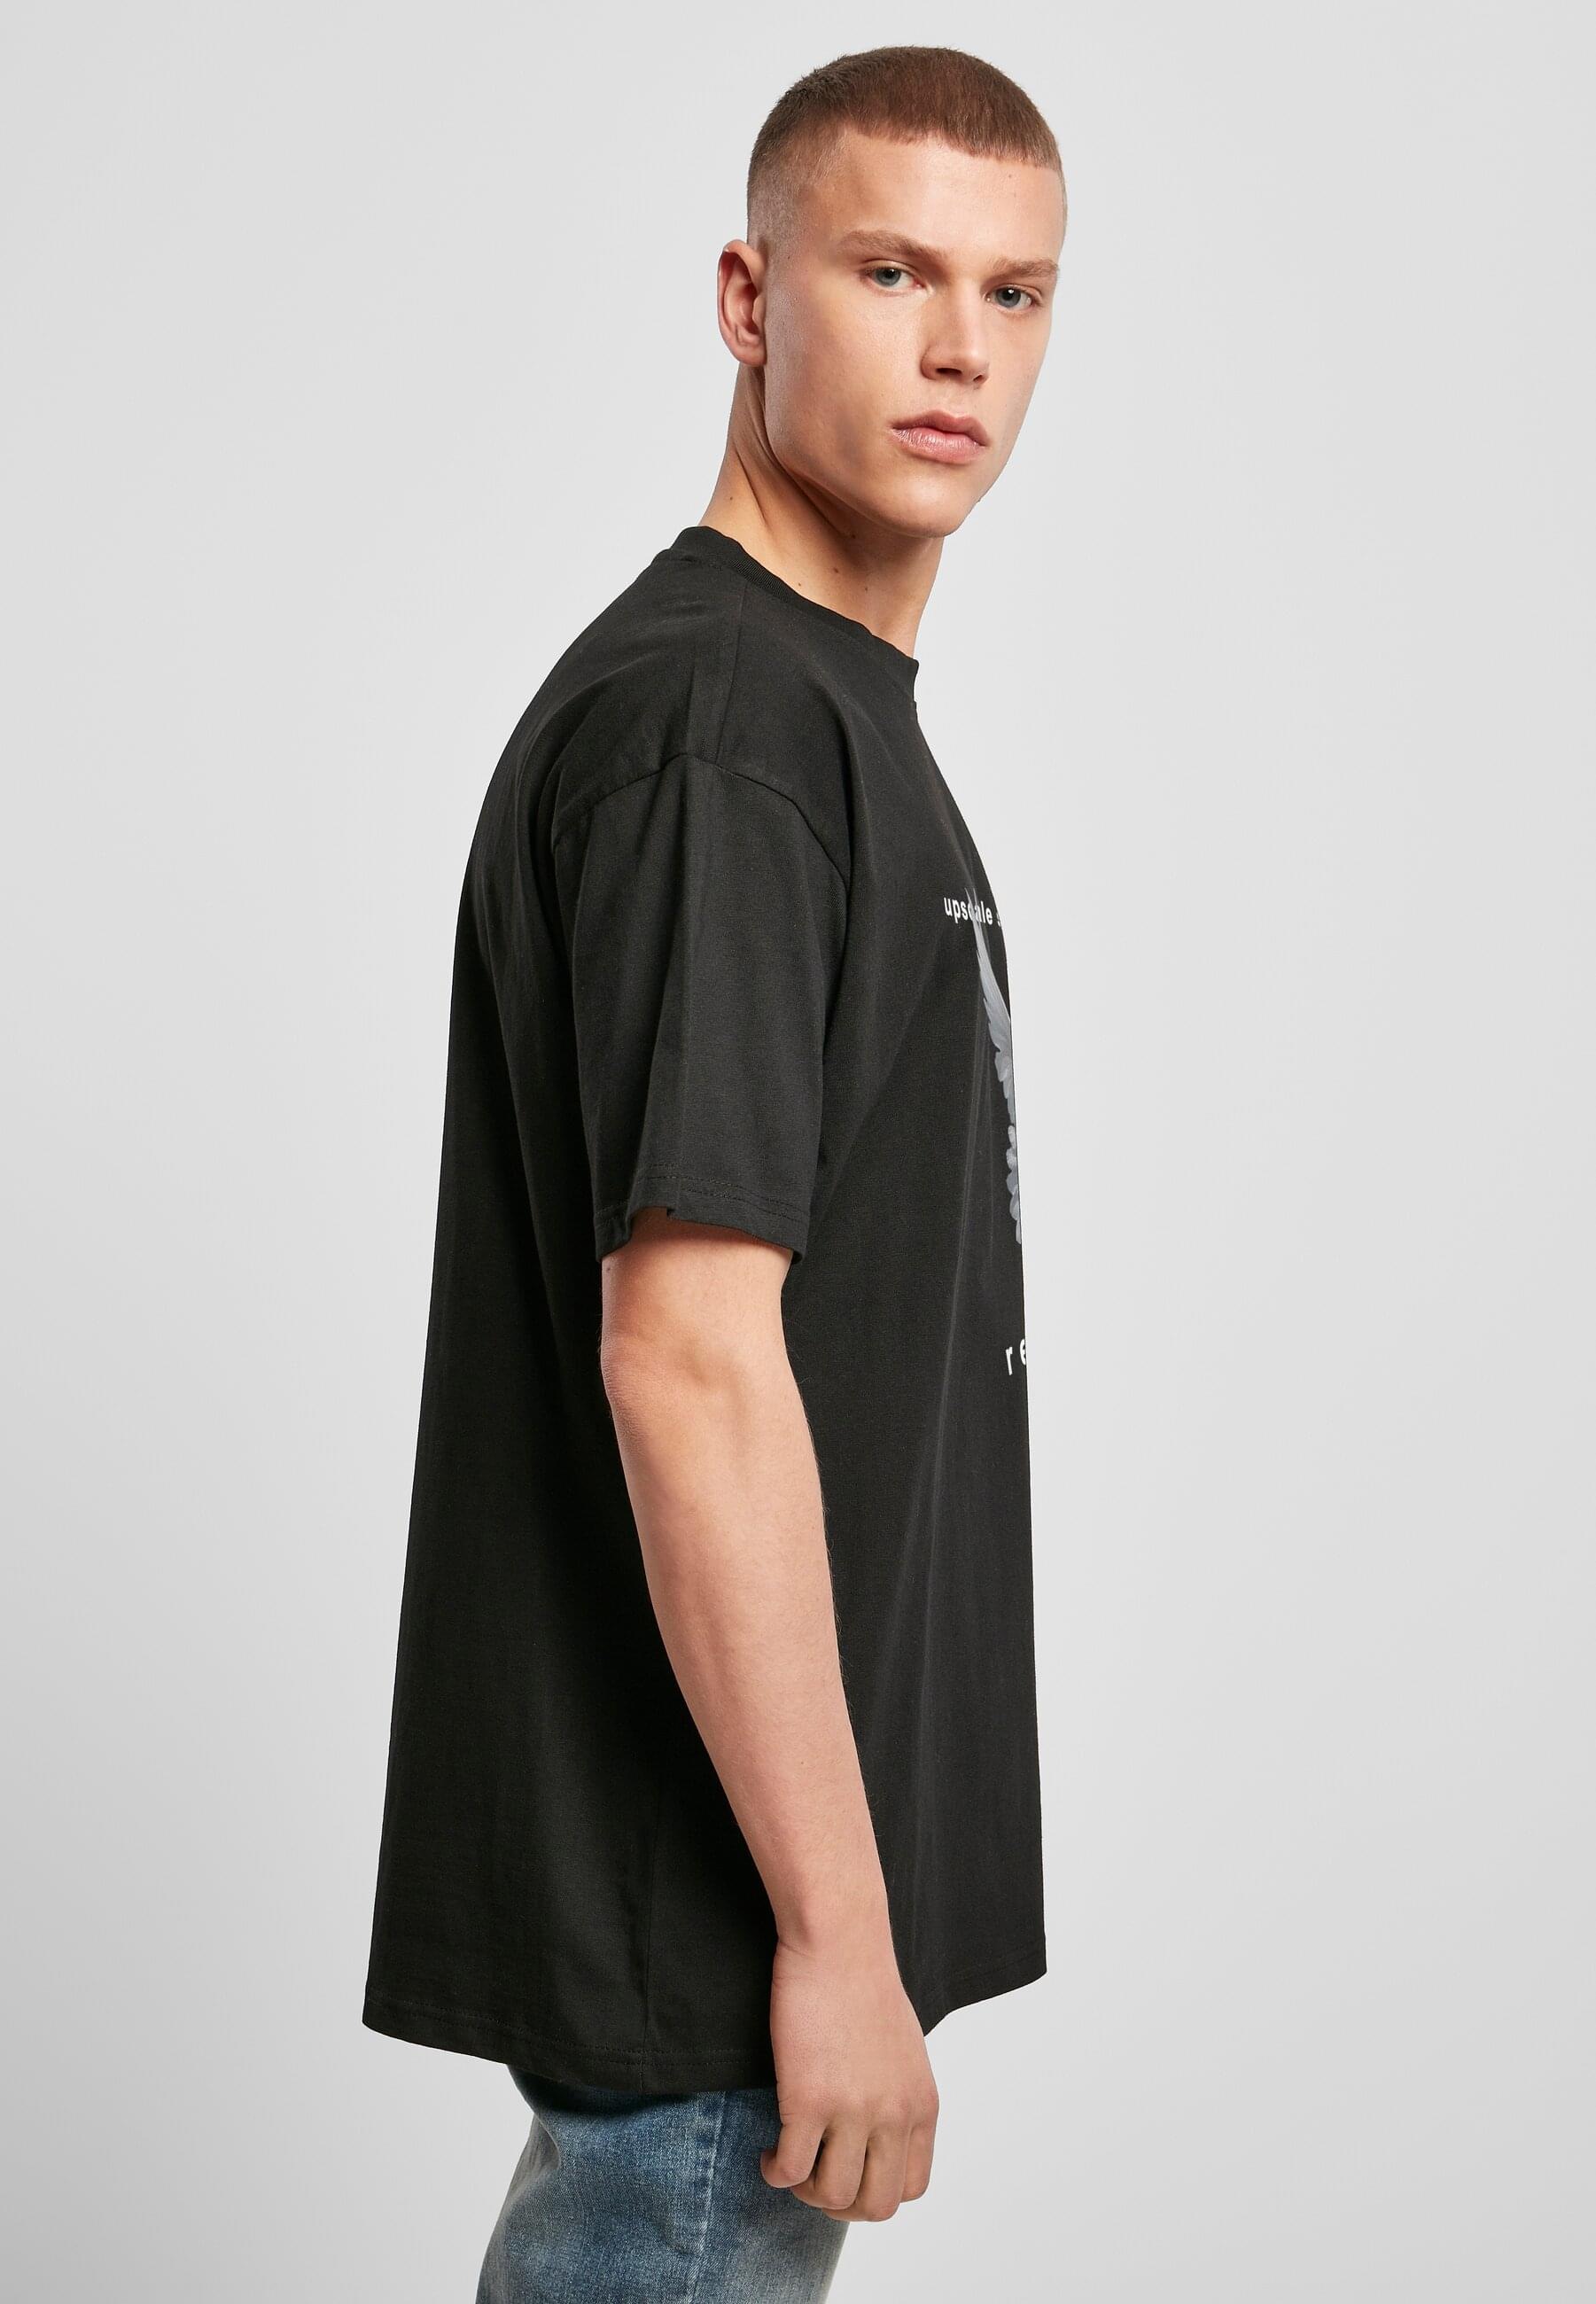 Upscale by T-Shirt to Oversize fly Tee«, BAUR tlg.) kaufen Ready »Unisex Tee (1 Mister | ▷